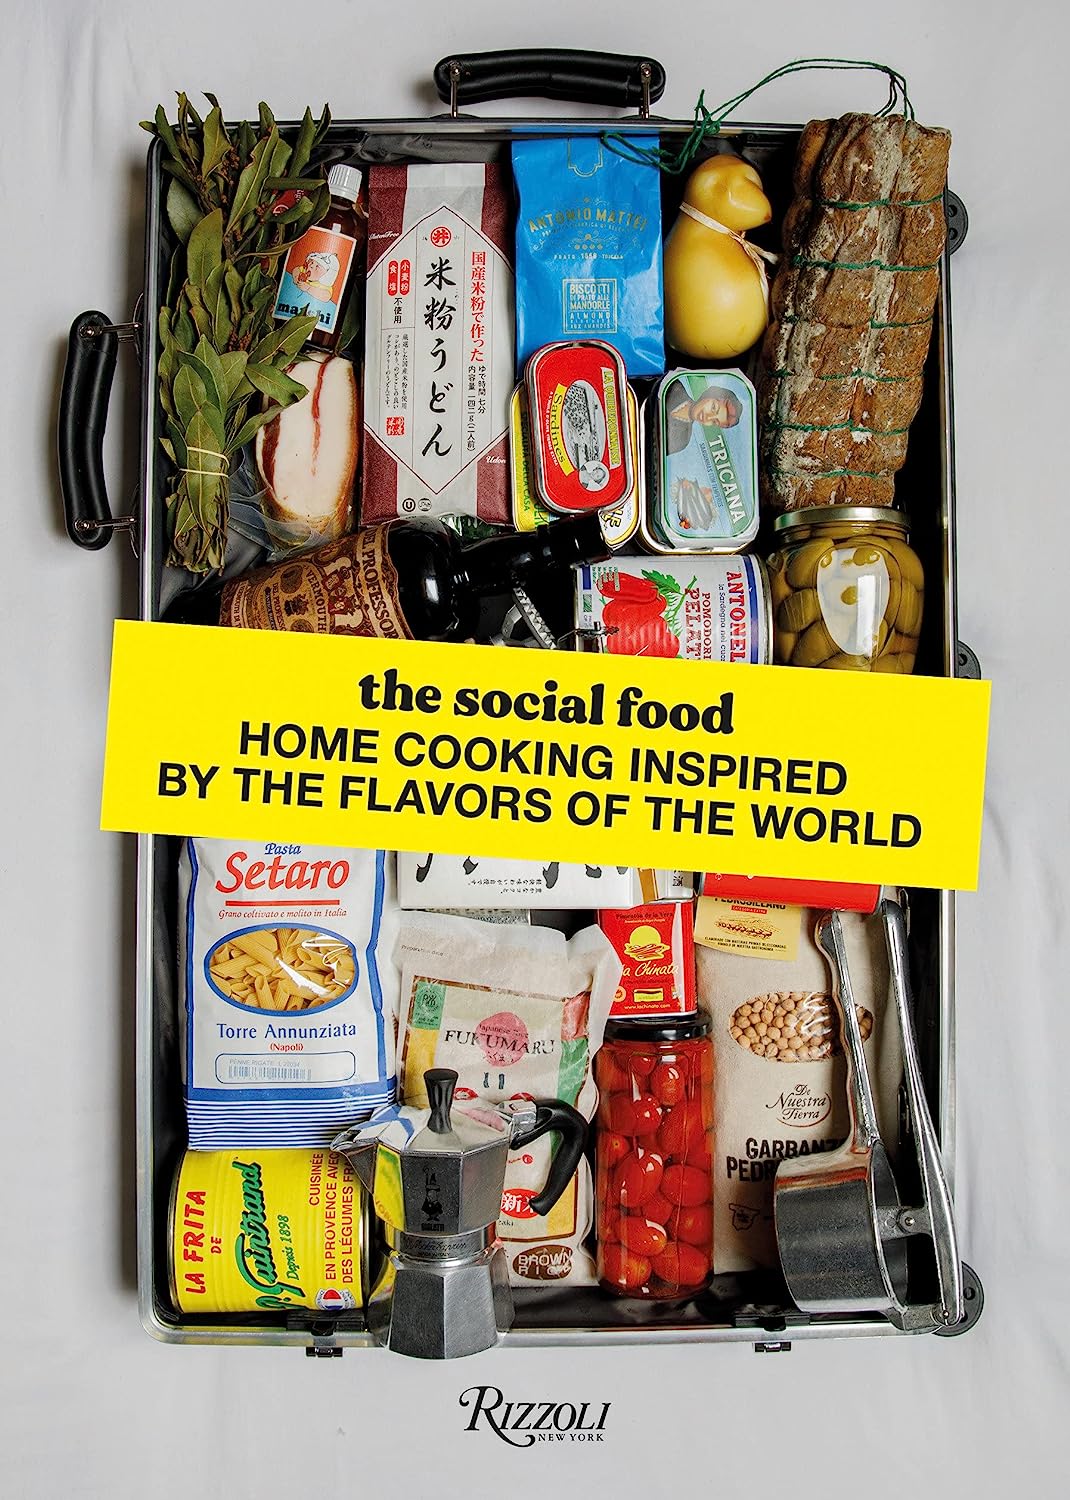 The Social Food: Home Cooking Inspired by the Flavors of the World